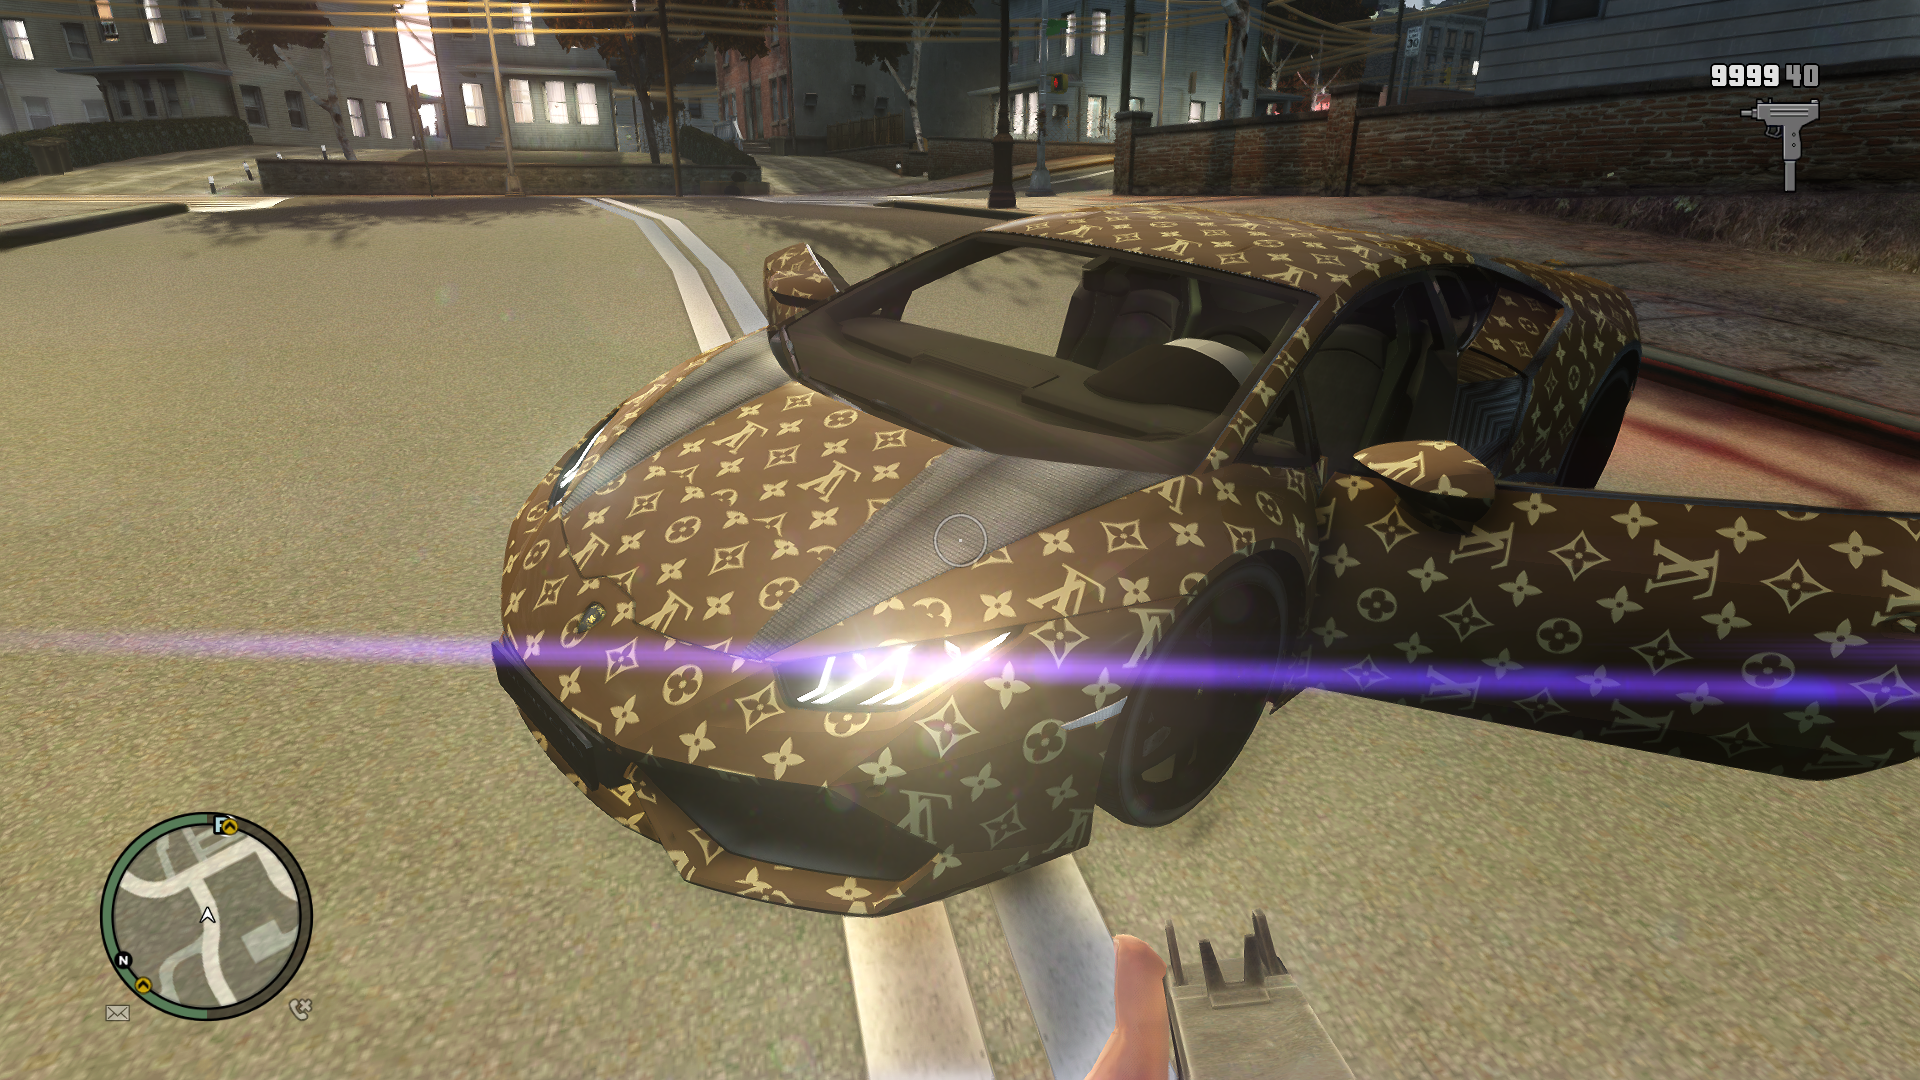 How to Install SUPREME x LOUIS VUITTON SHOP  Bape 2020 GTA 5 MODS  Gta  5 mods Gta 5 Louis vuitton shop